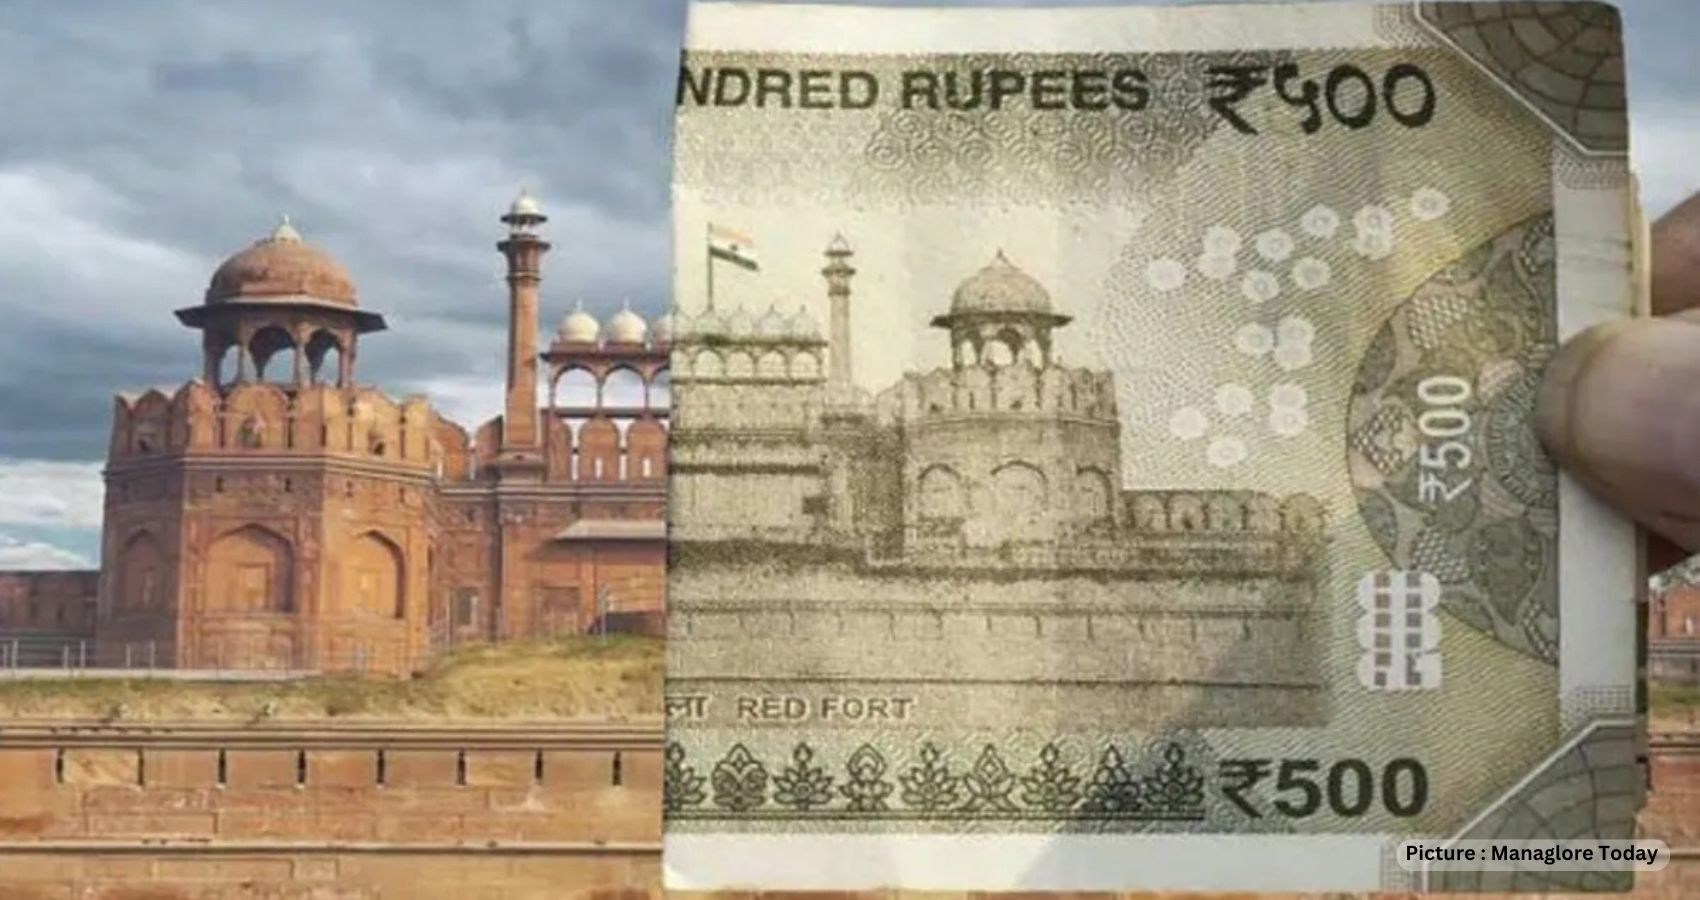 India’s Historical Monuments Featured on Indian Currency Notes